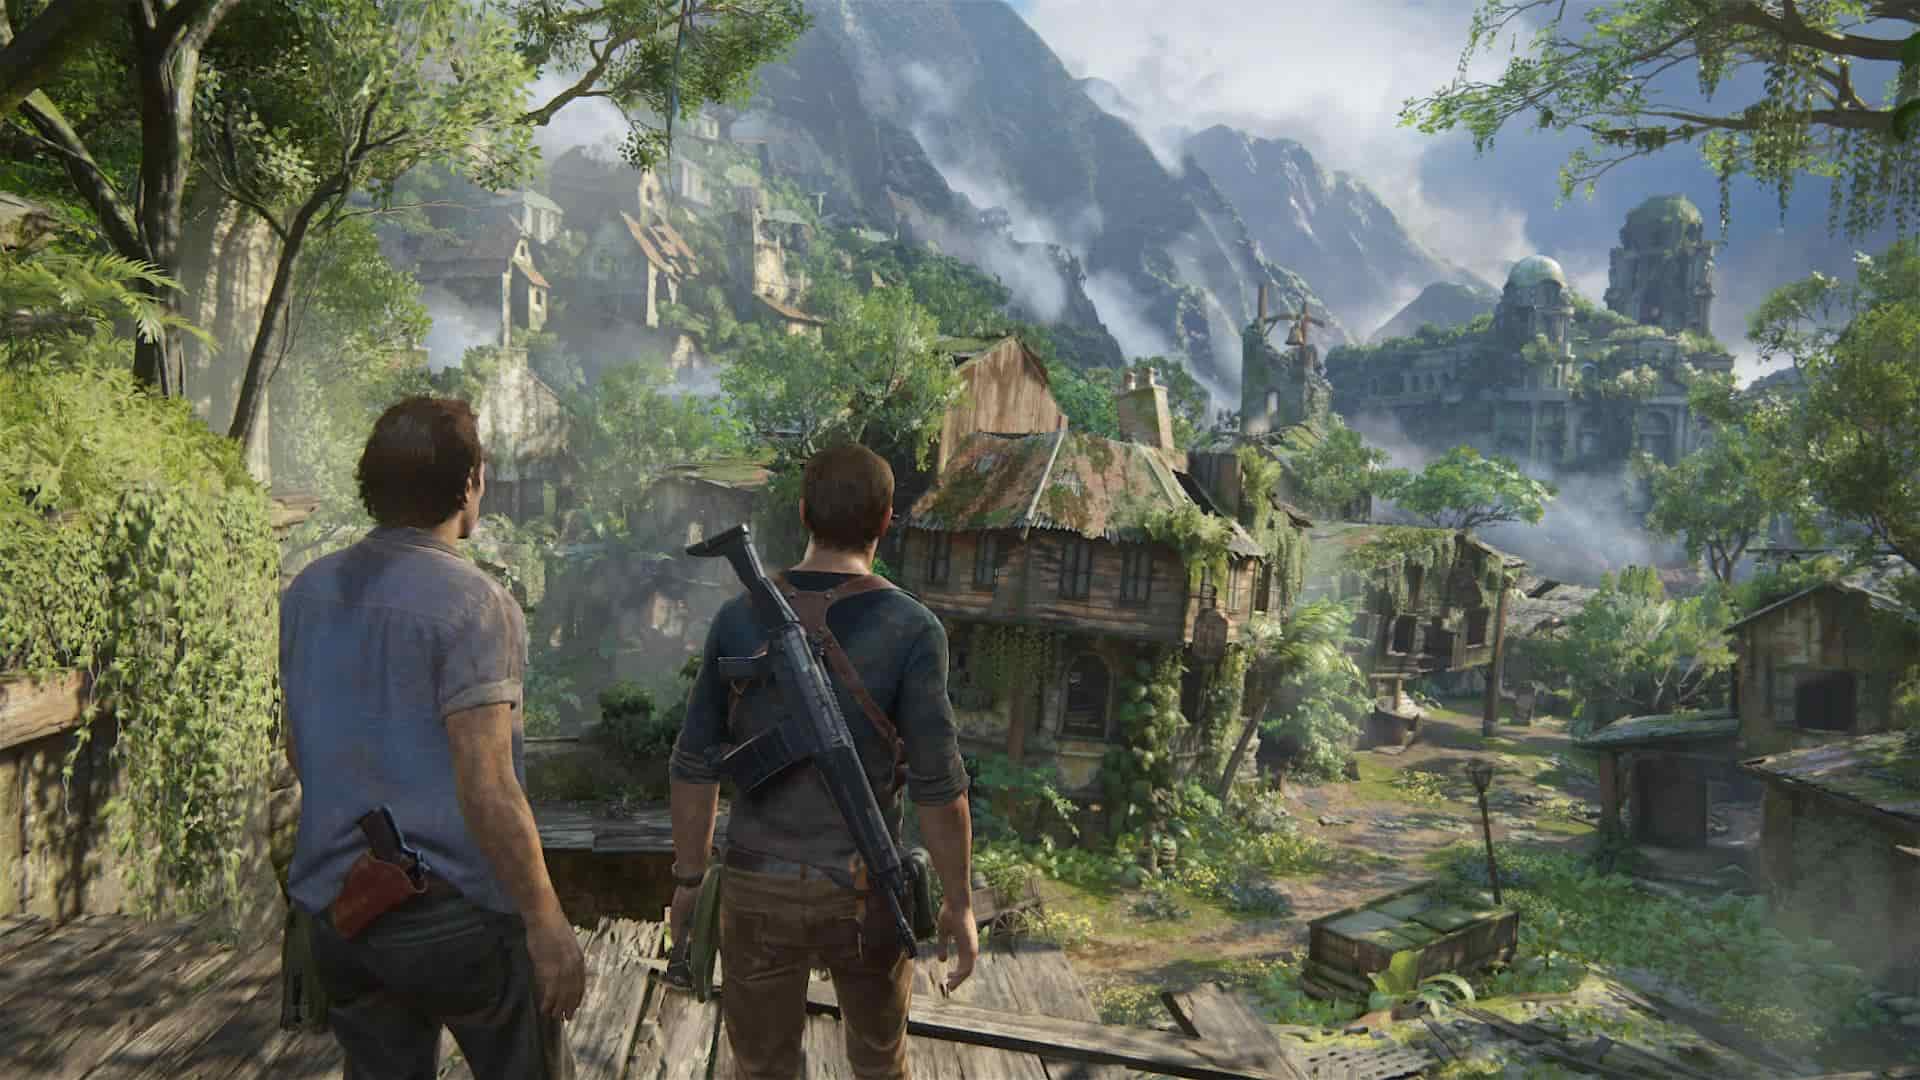 Greatness from small beginnings: The inside story of Uncharted